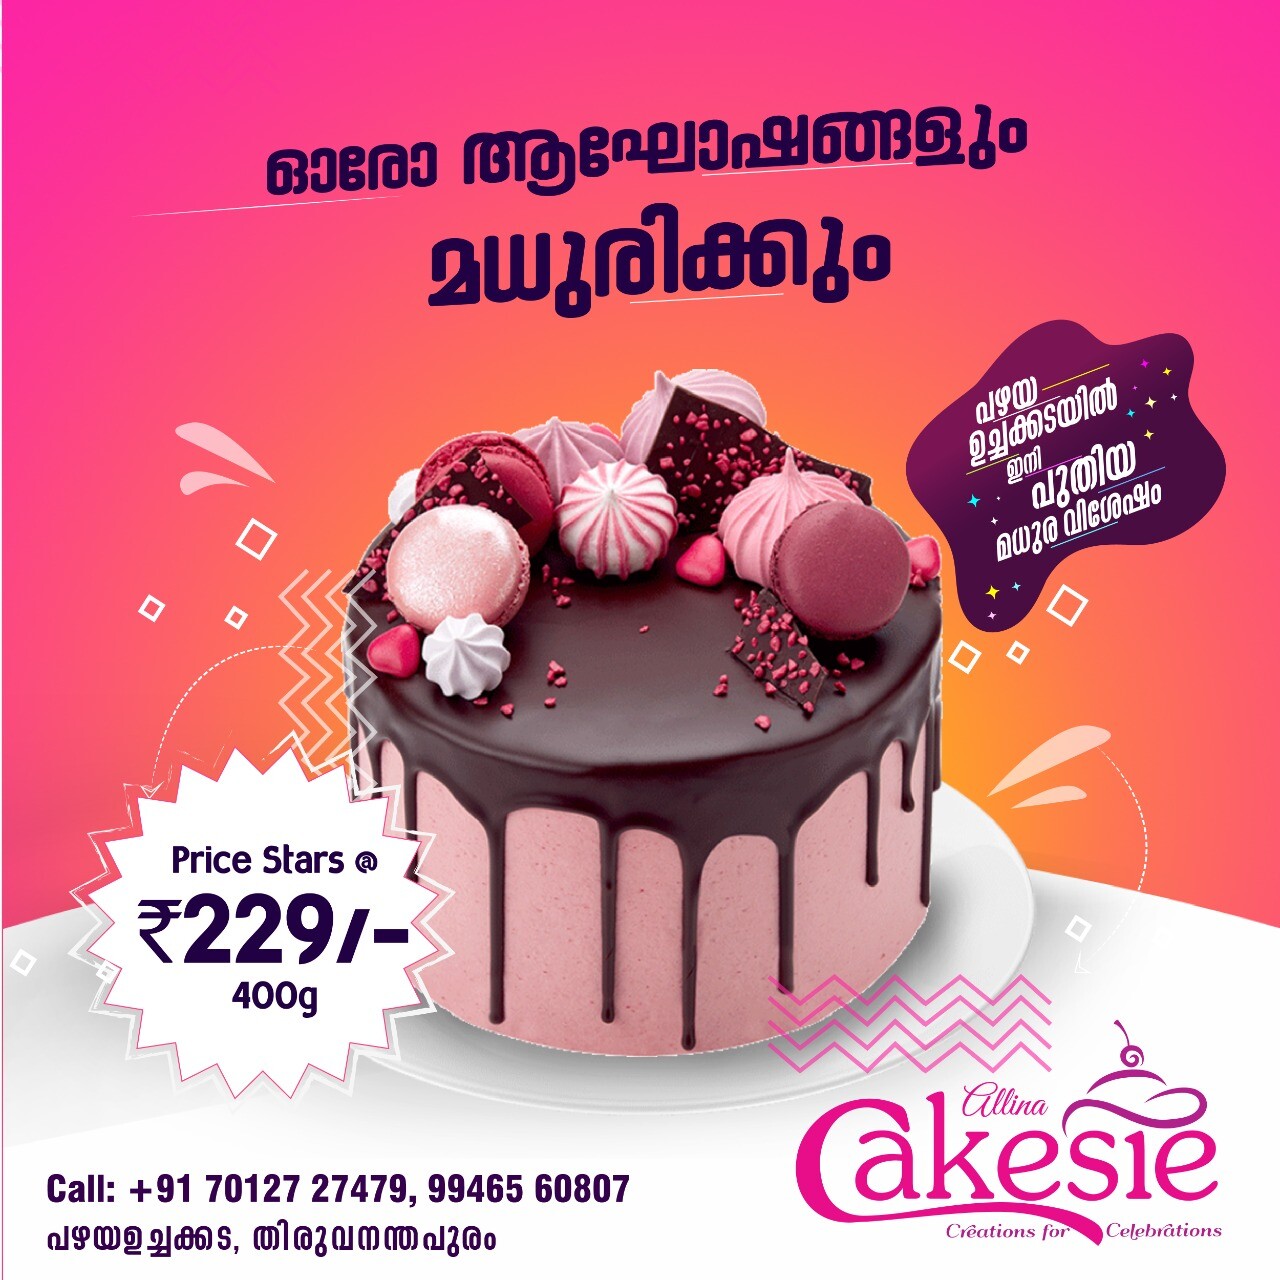 Cake poster template image_picture free download 400183087_lovepik.com